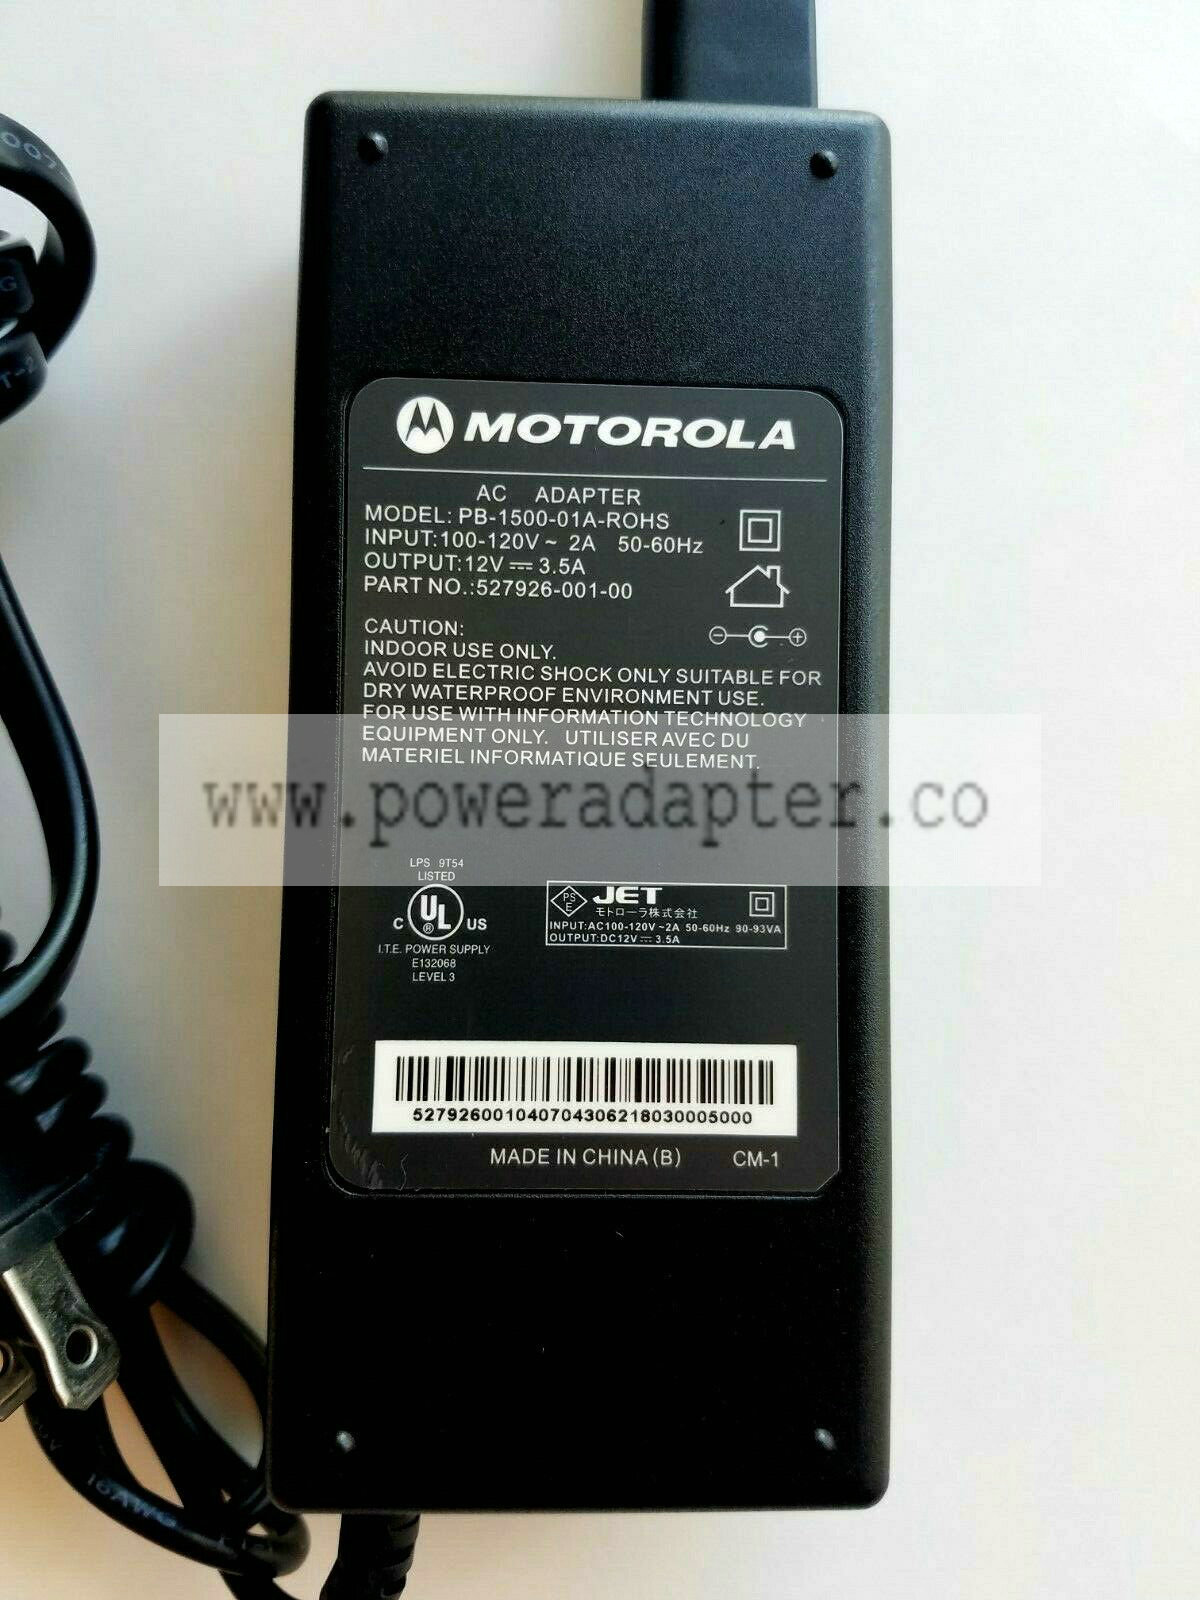 Motorola PB-1500-01A-ROHS AC Adapter Output 12V 3.5A Laptop Power Supply Charger Brand: Motorola Type: Power Adapte - Click Image to Close